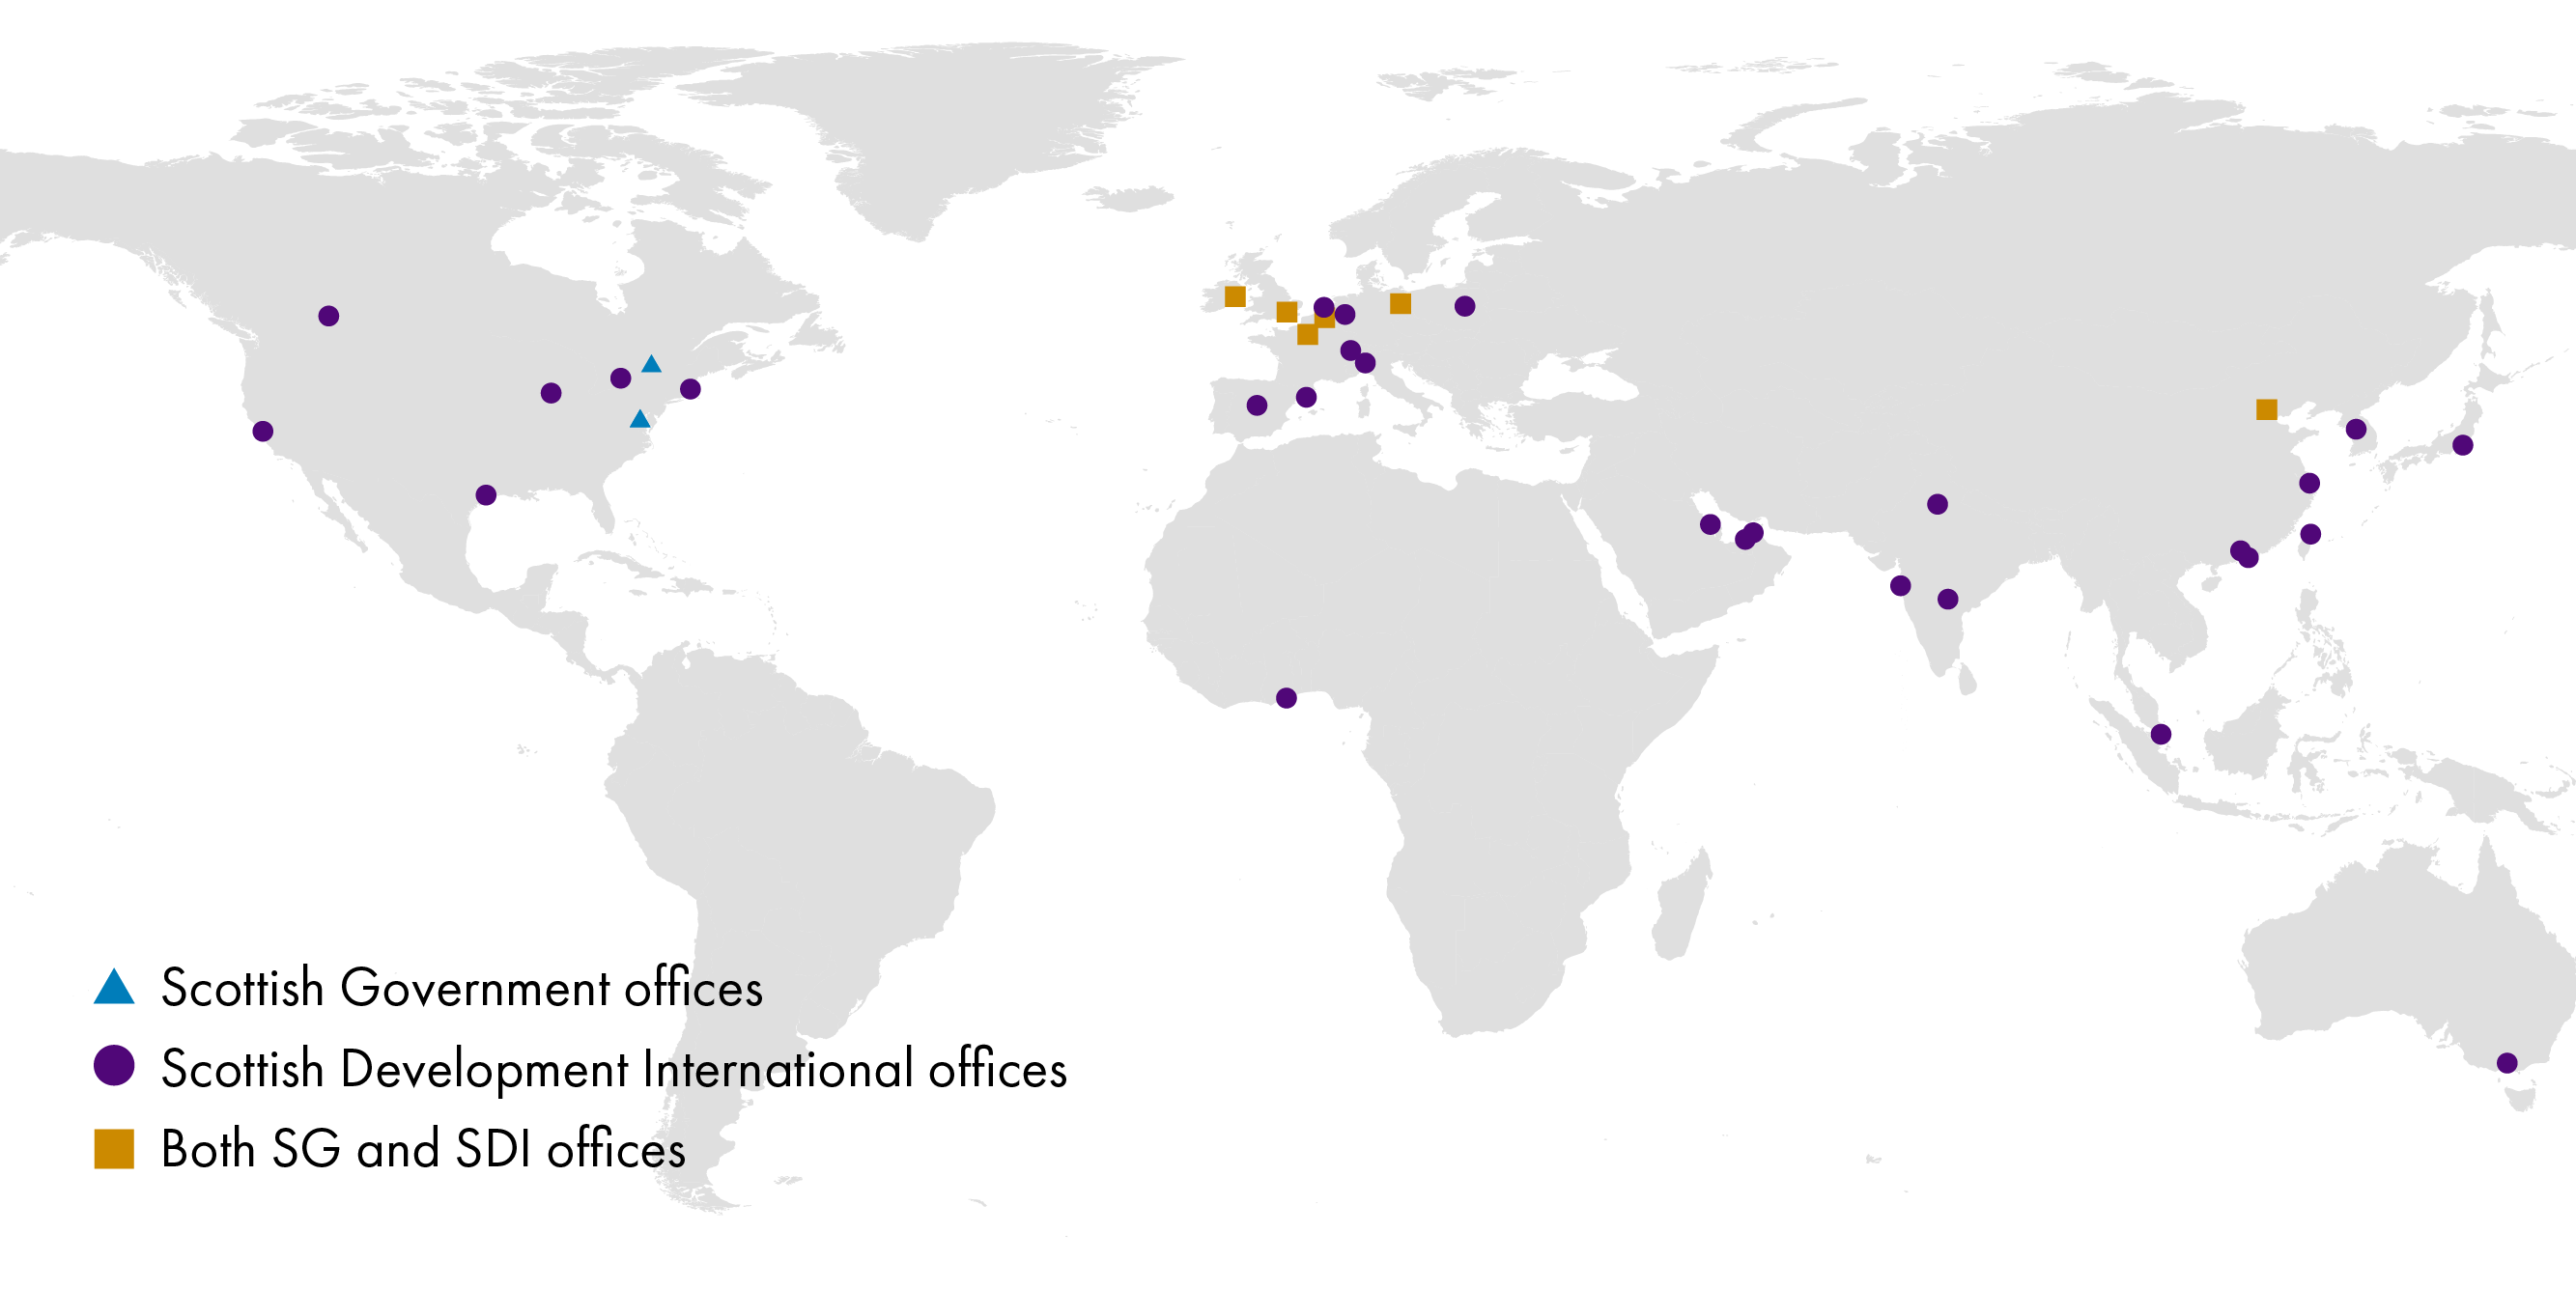 This map shows the location of the Scottish Government's 8 international offices and Scottish Development International's 34 international offices.